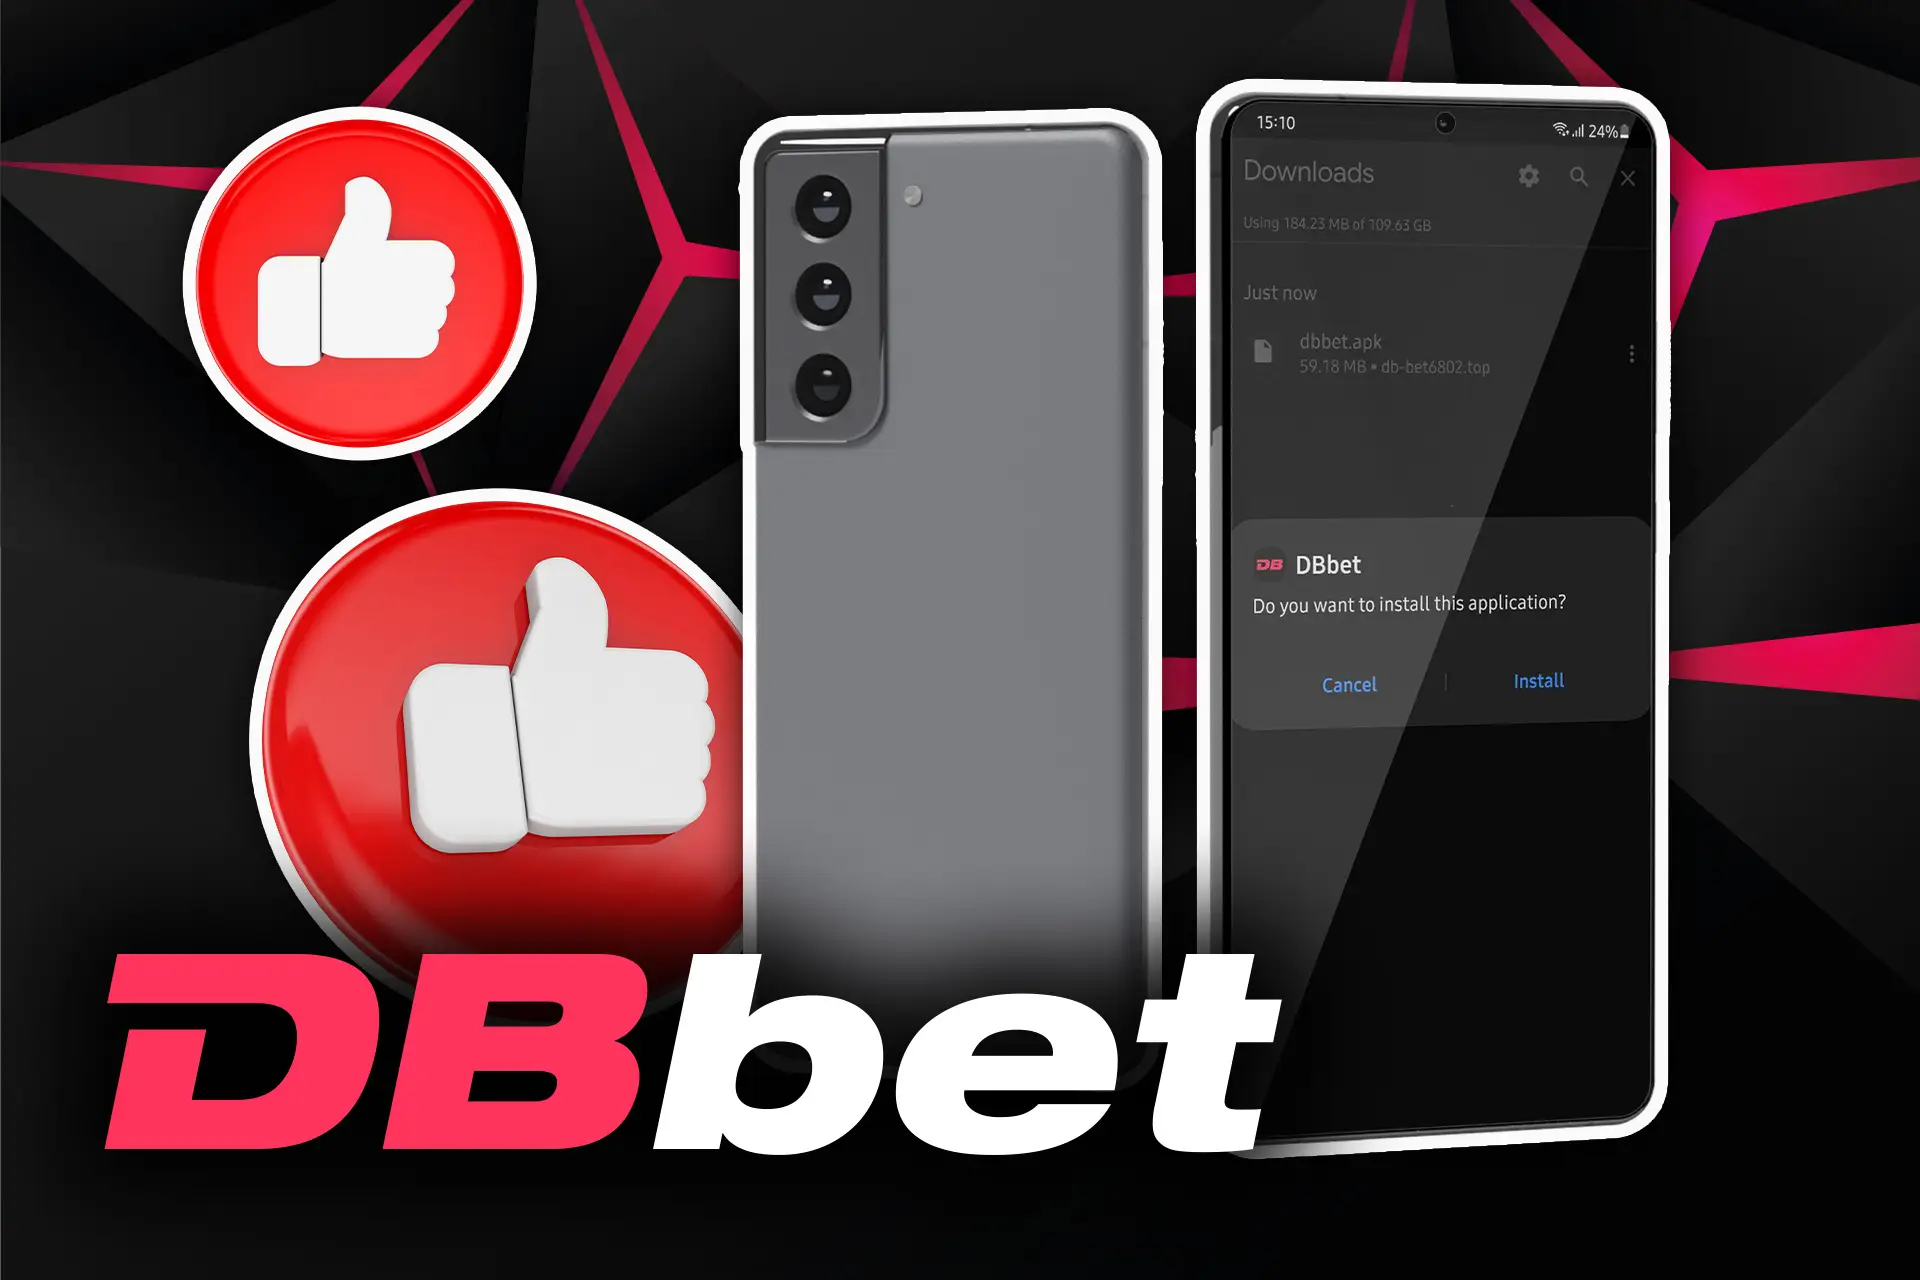 Confirm the installation of the DBbet app.